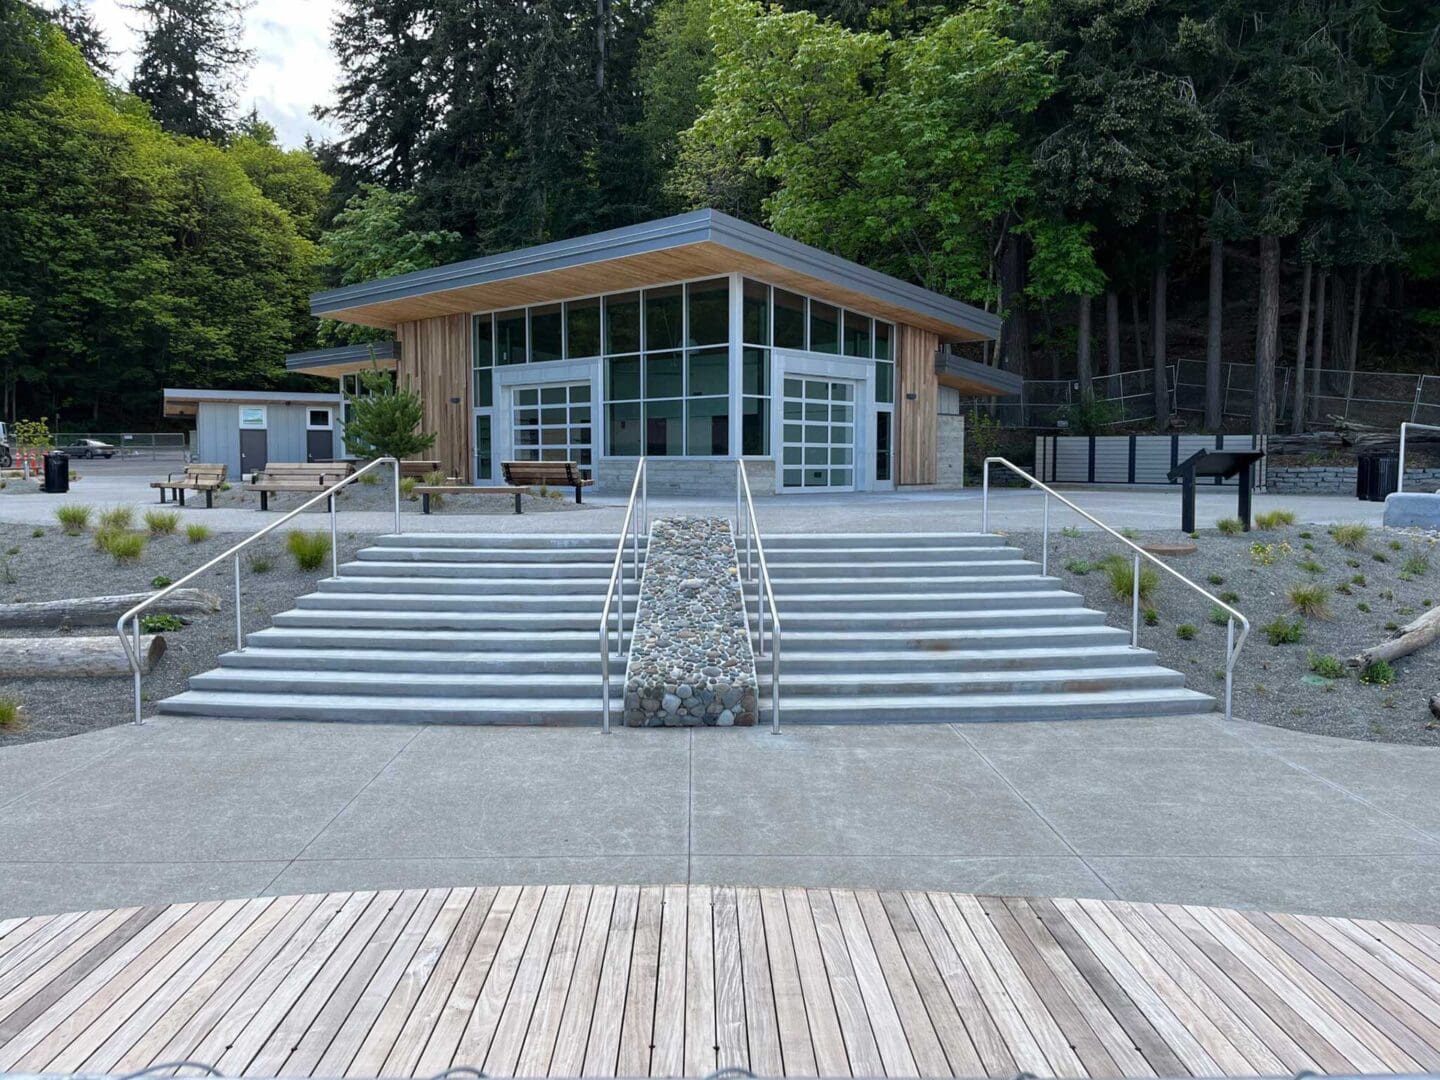 Exterior view of Owen Beach Pavilion in Tacoma, WA